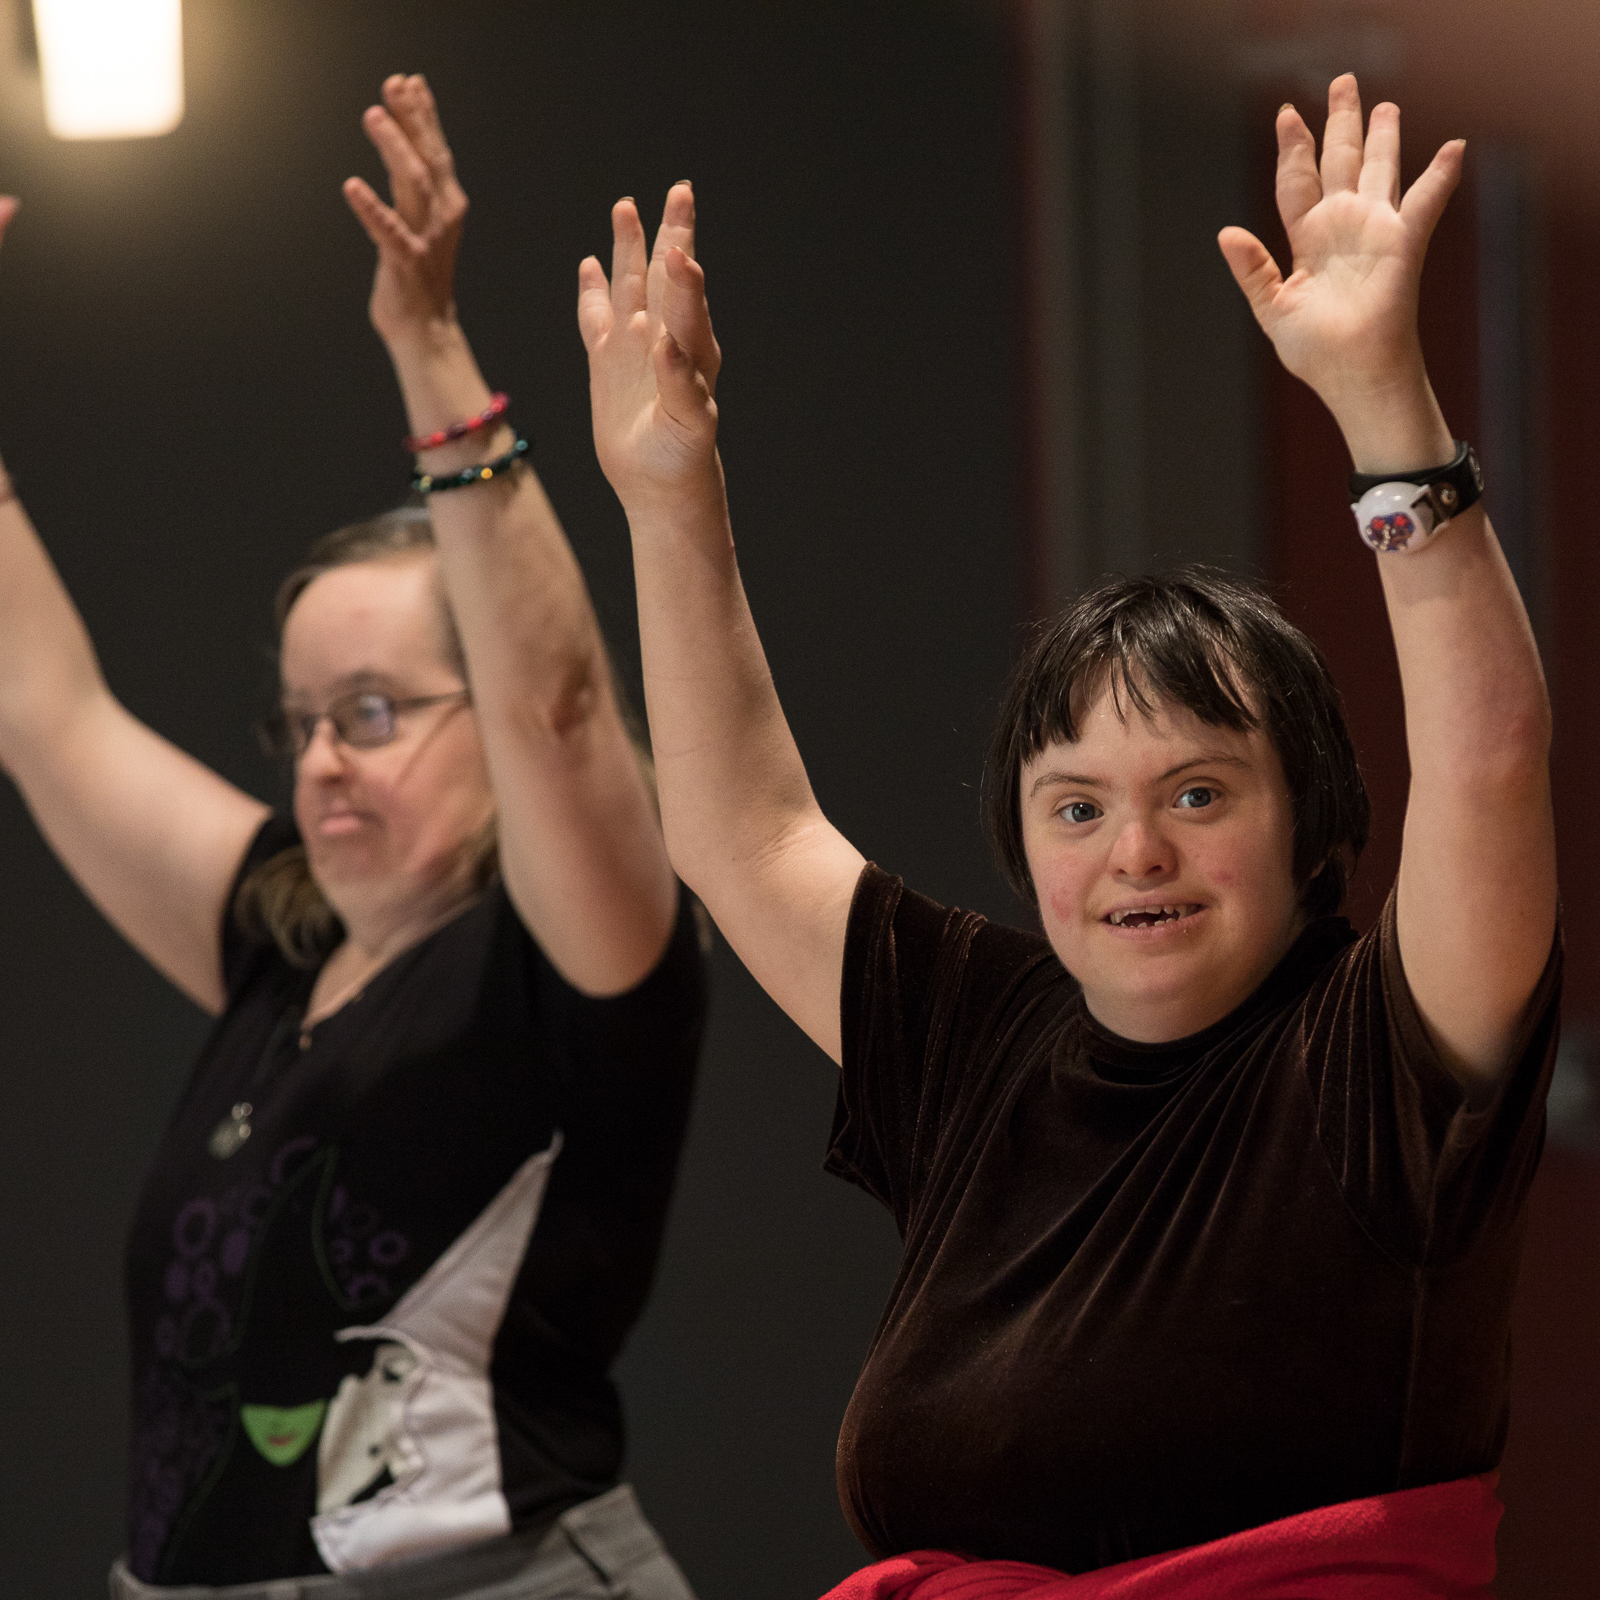 CATA artists hold hands above their heads in a dance class